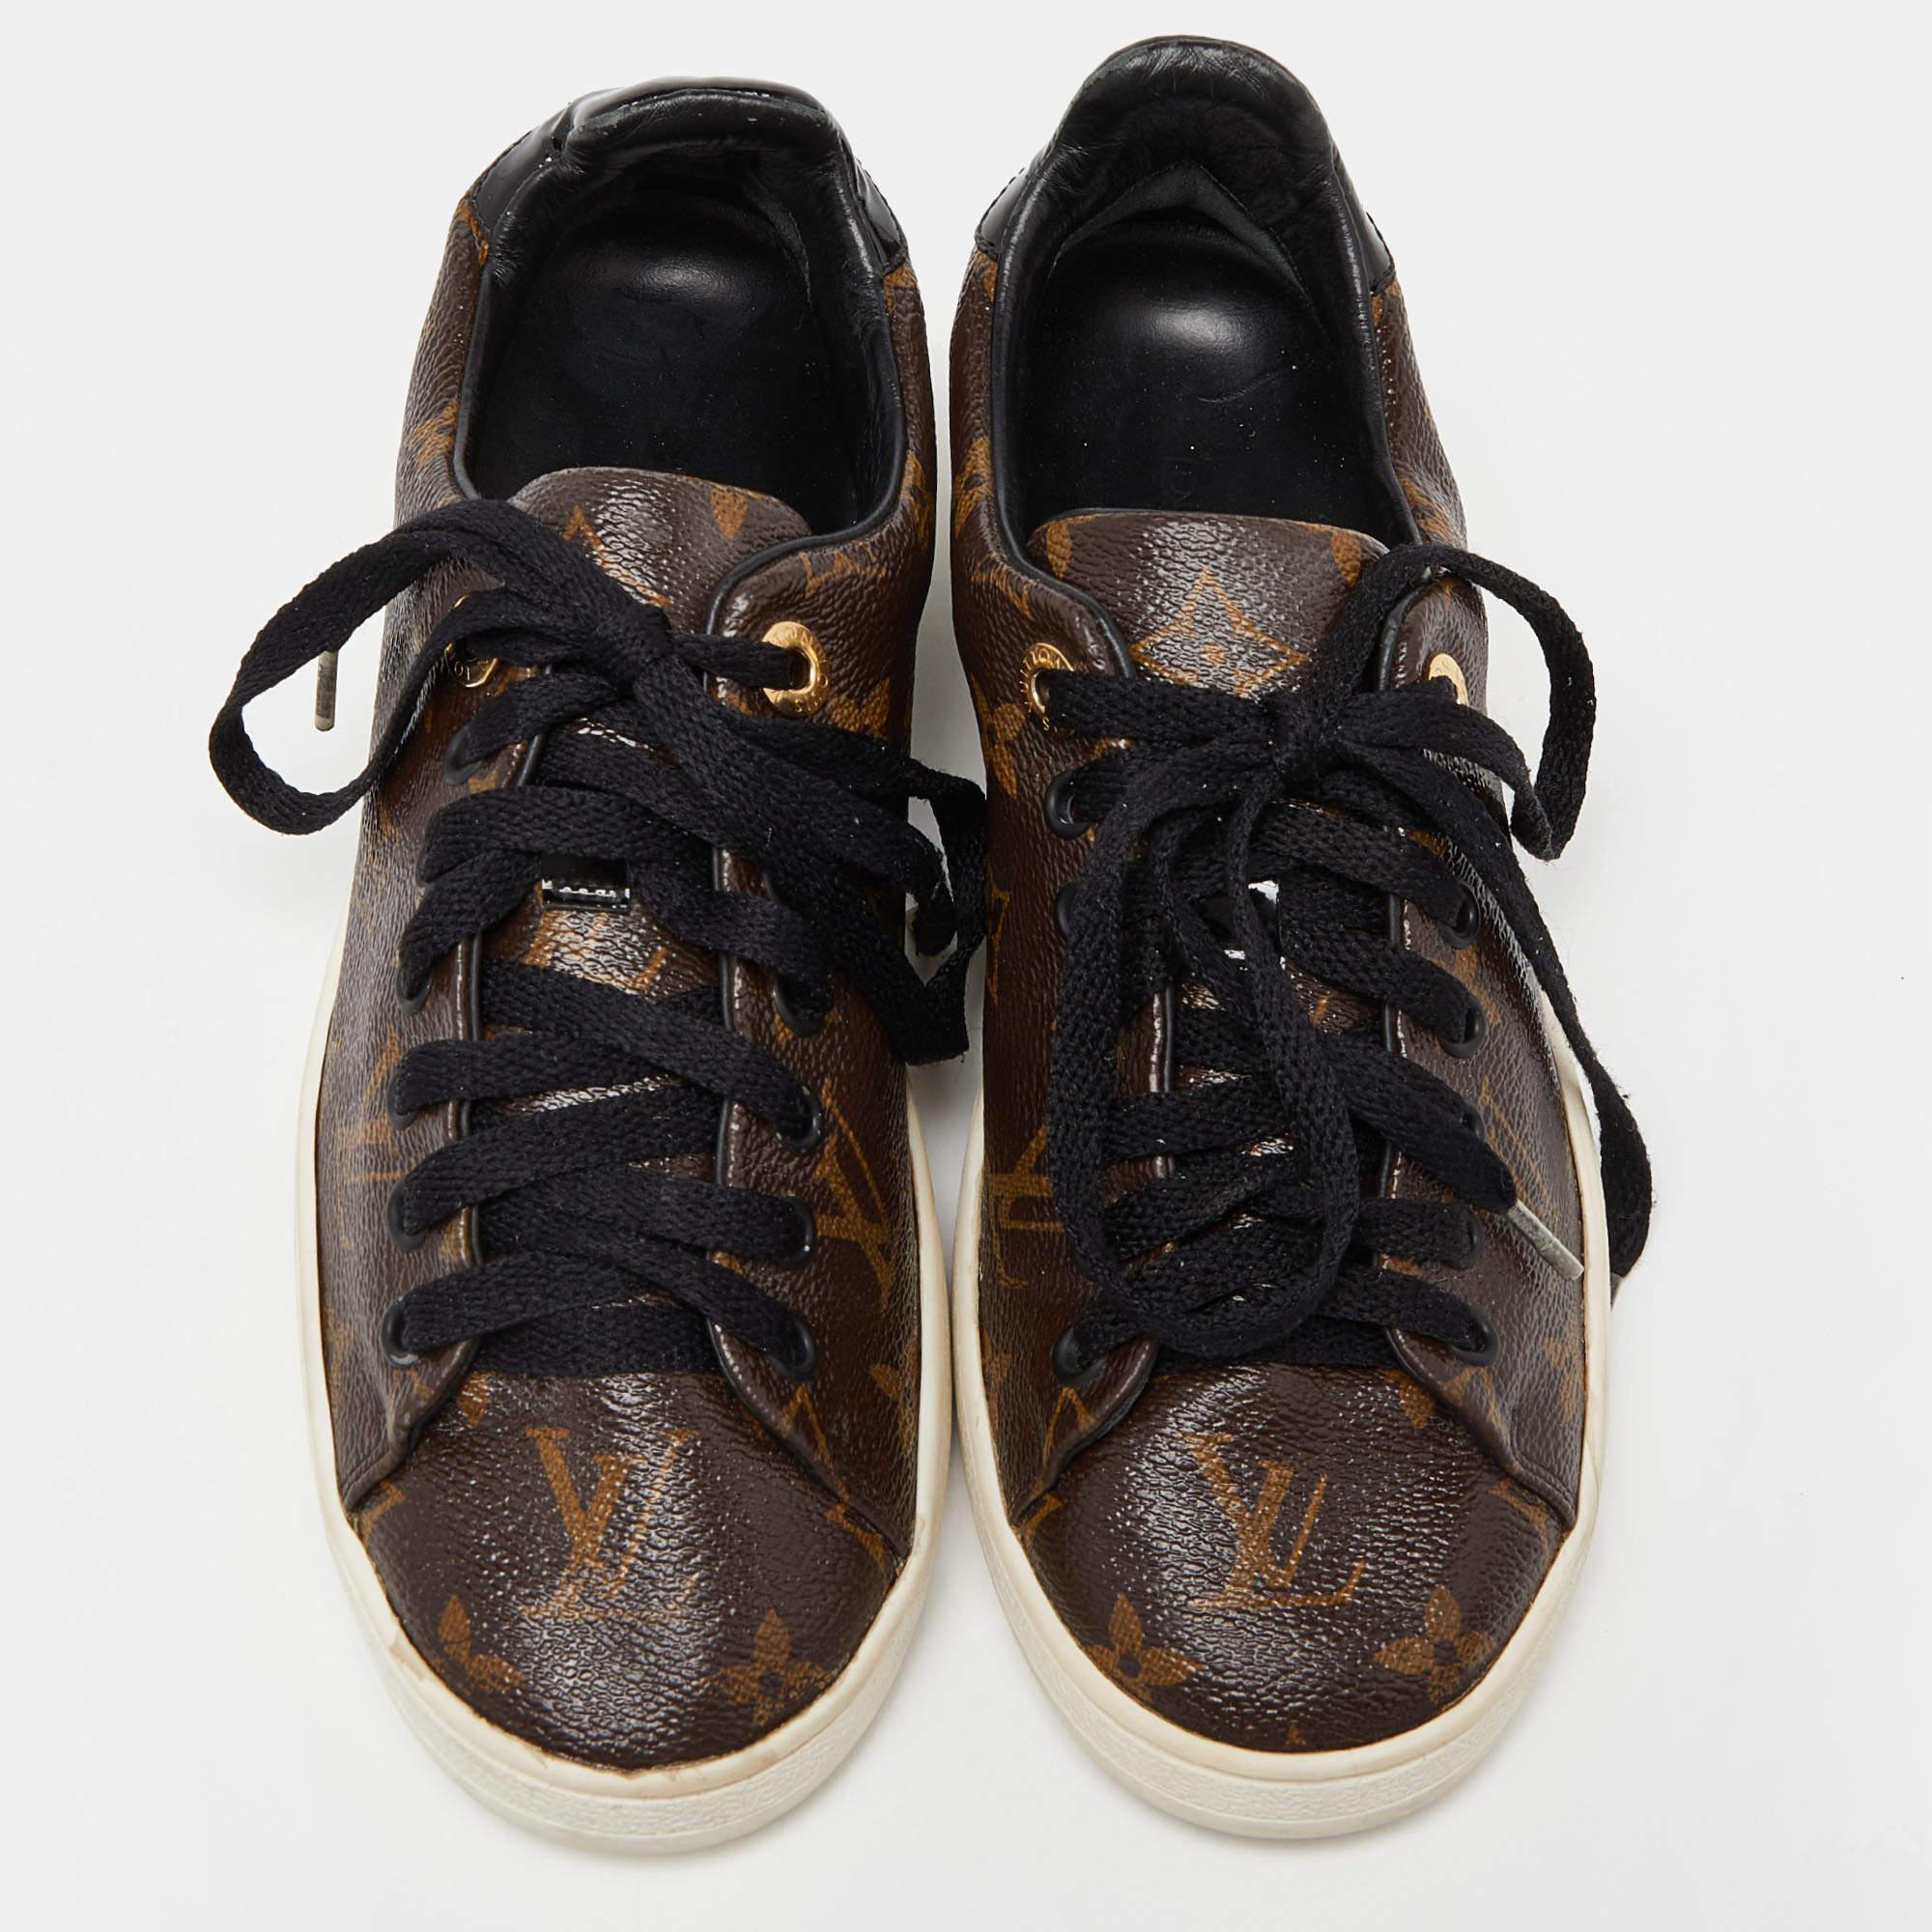 Louis Vuitton Monogram Canvas and Patent Leather Frontrow Sneakers Size 36 In Good Condition For Sale In Dubai, Al Qouz 2